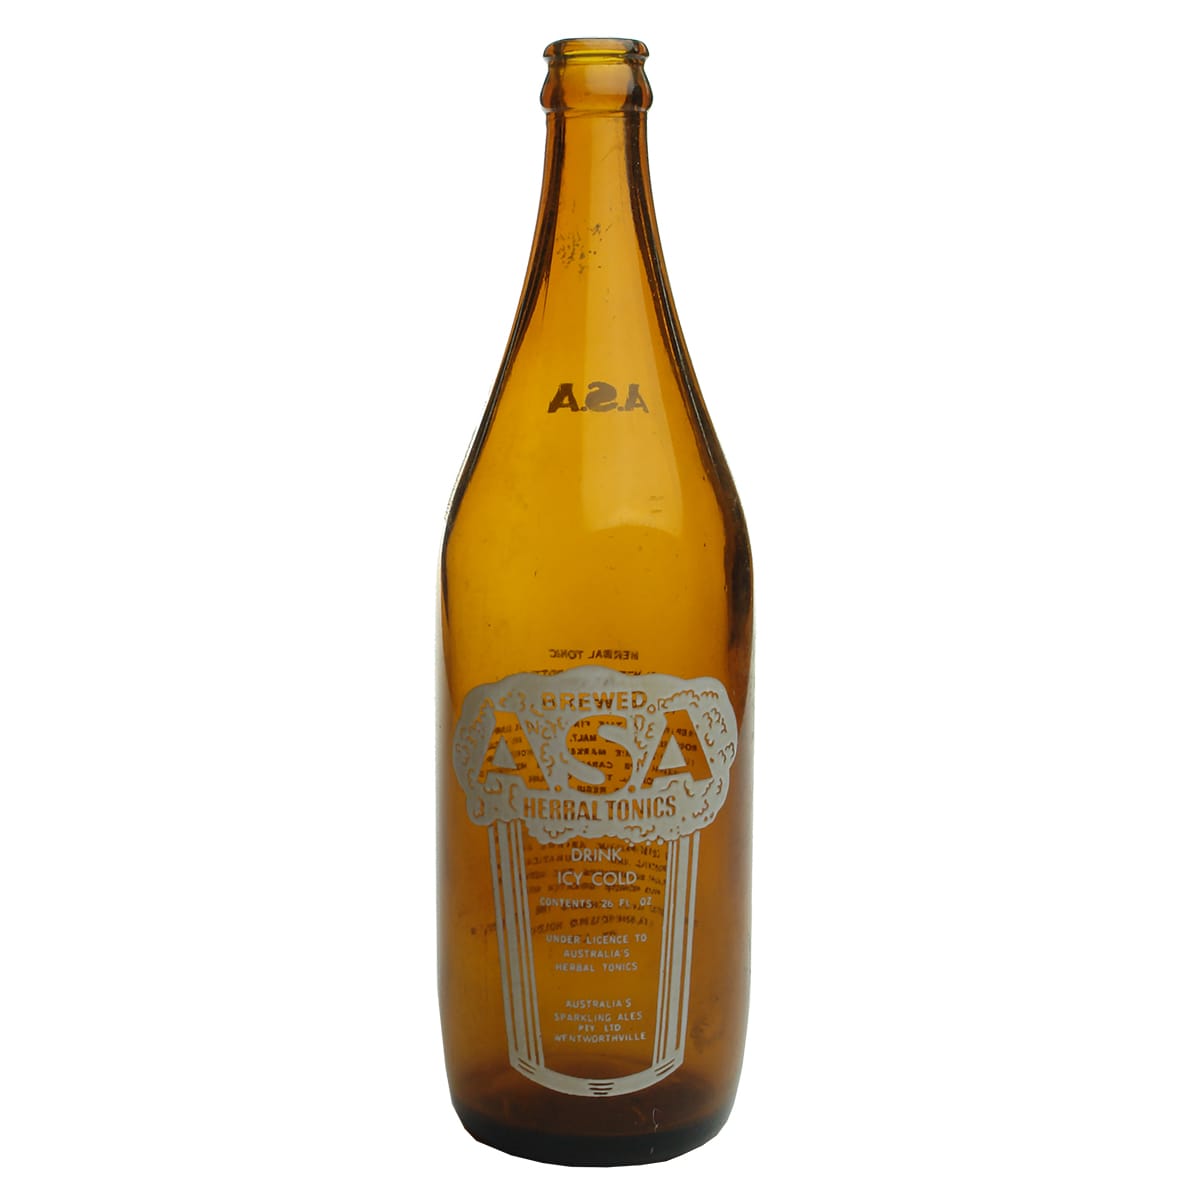 Crown Seal. Australia's Sparkling Ales Herbal Tonic. Ceramic Label. Amber. 26 oz. (New South Wales)